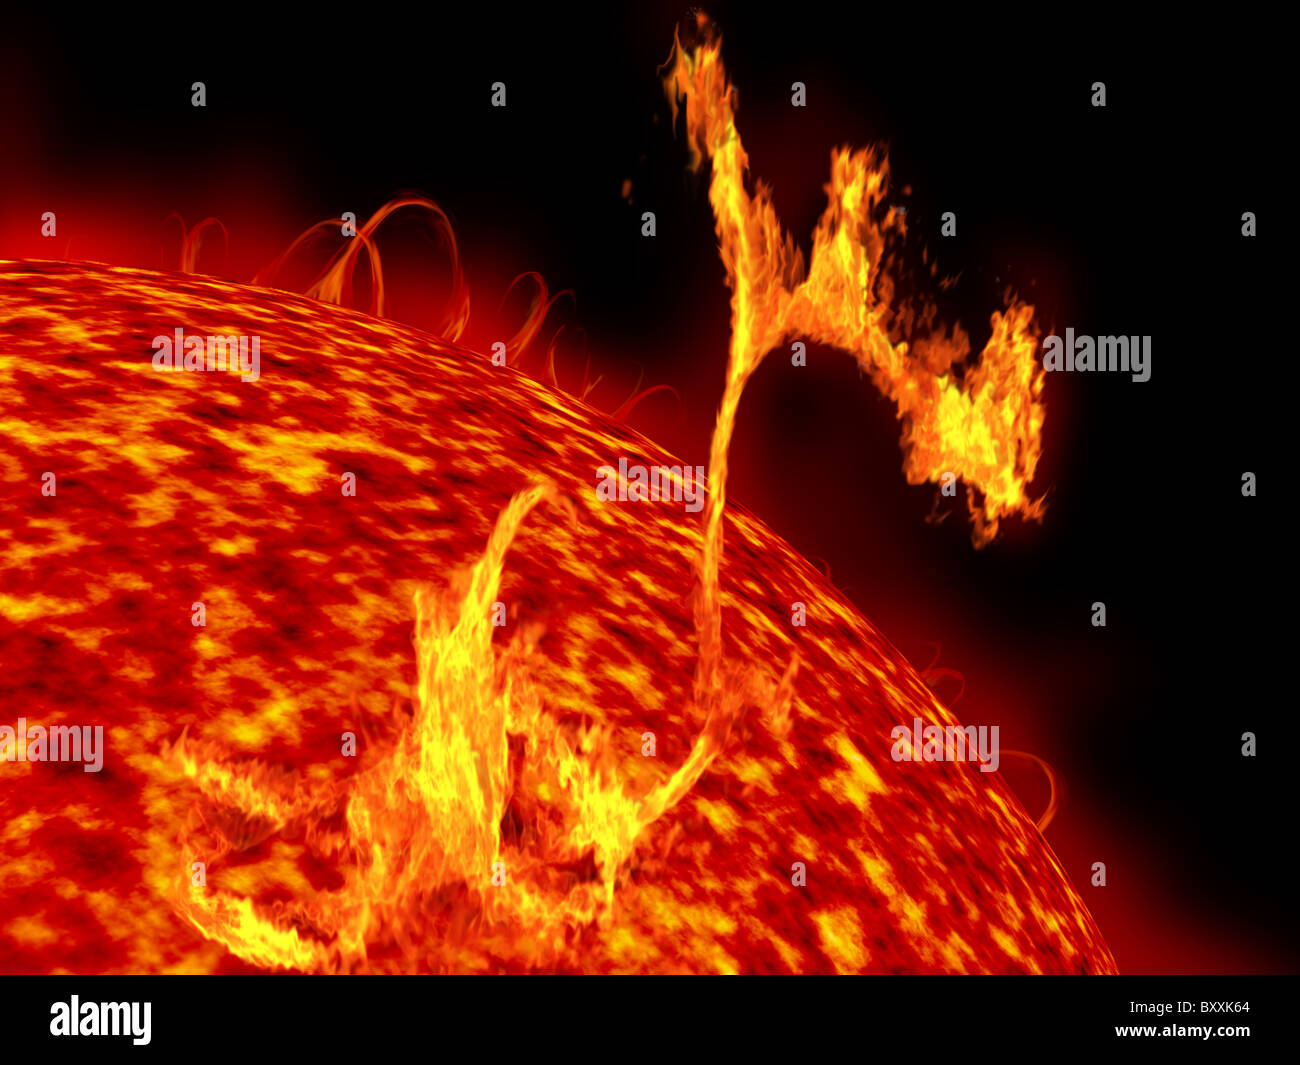 Illustration of the sun showing formidable solar flares Stock Photo